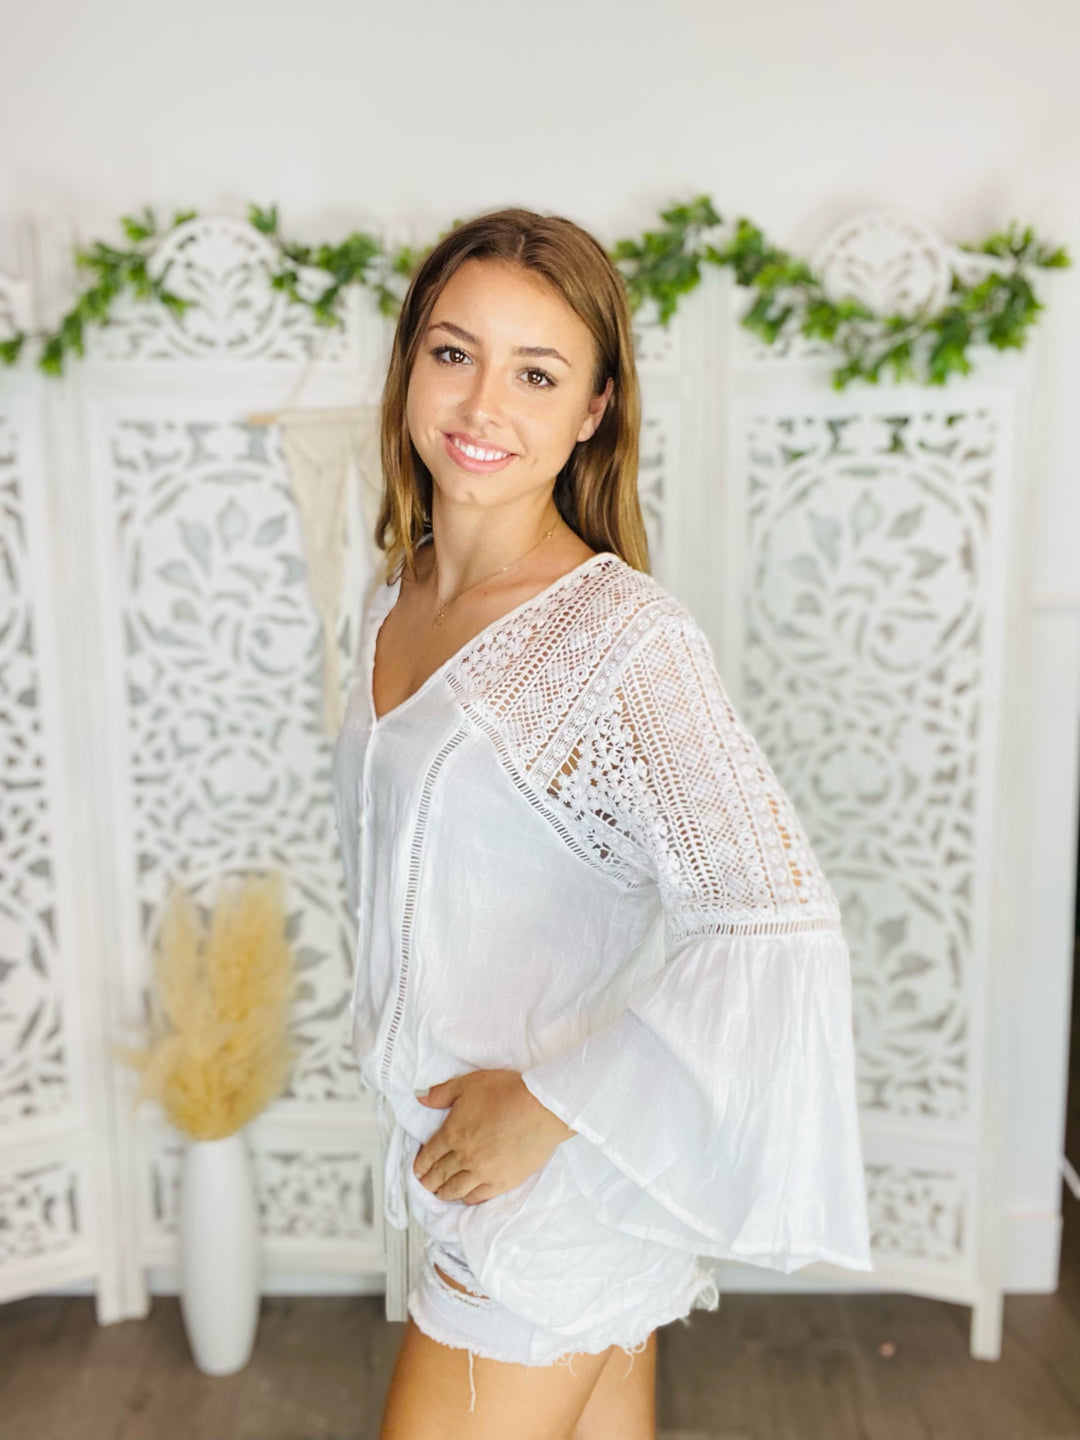 TAKE ON ME Boho Chic Button Up Lace Shirt-Shirts & Tops-Lavender J-Malandra Boutique, Women's Fashion Boutique Located in Las Vegas, NV